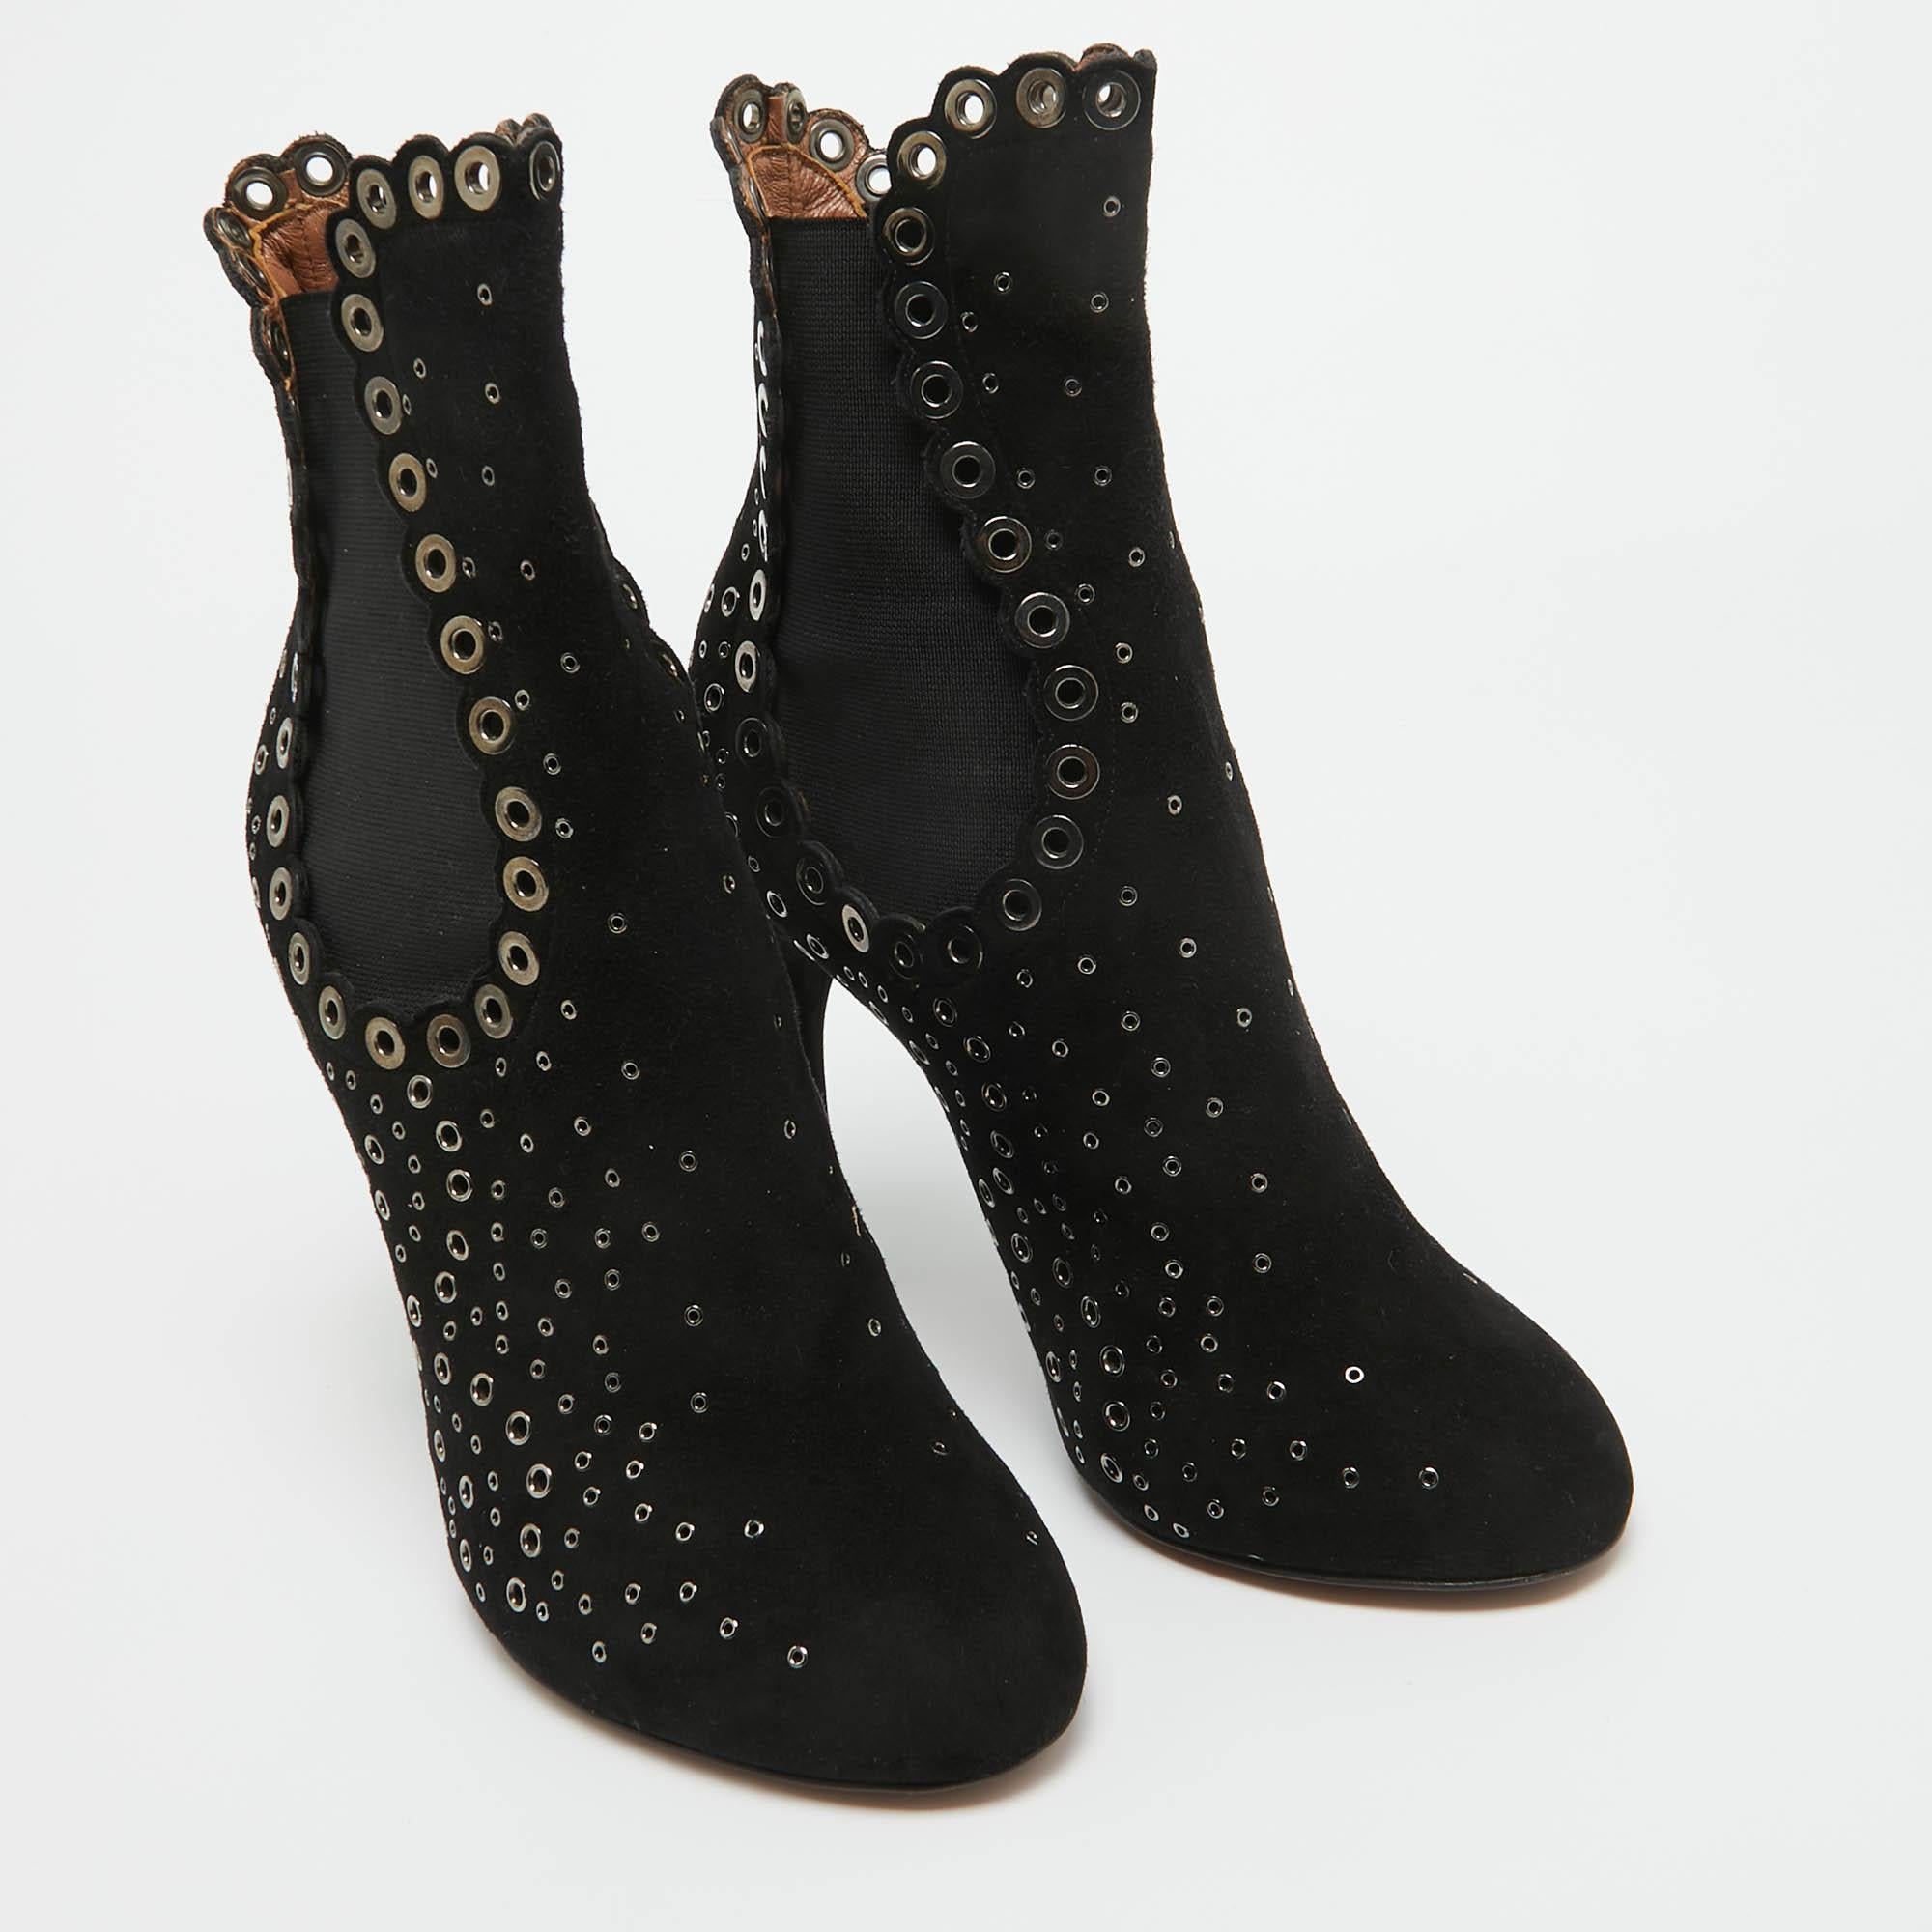 Alaia Black Suede Studded Ankle Boots Size 38 In Good Condition For Sale In Dubai, Al Qouz 2